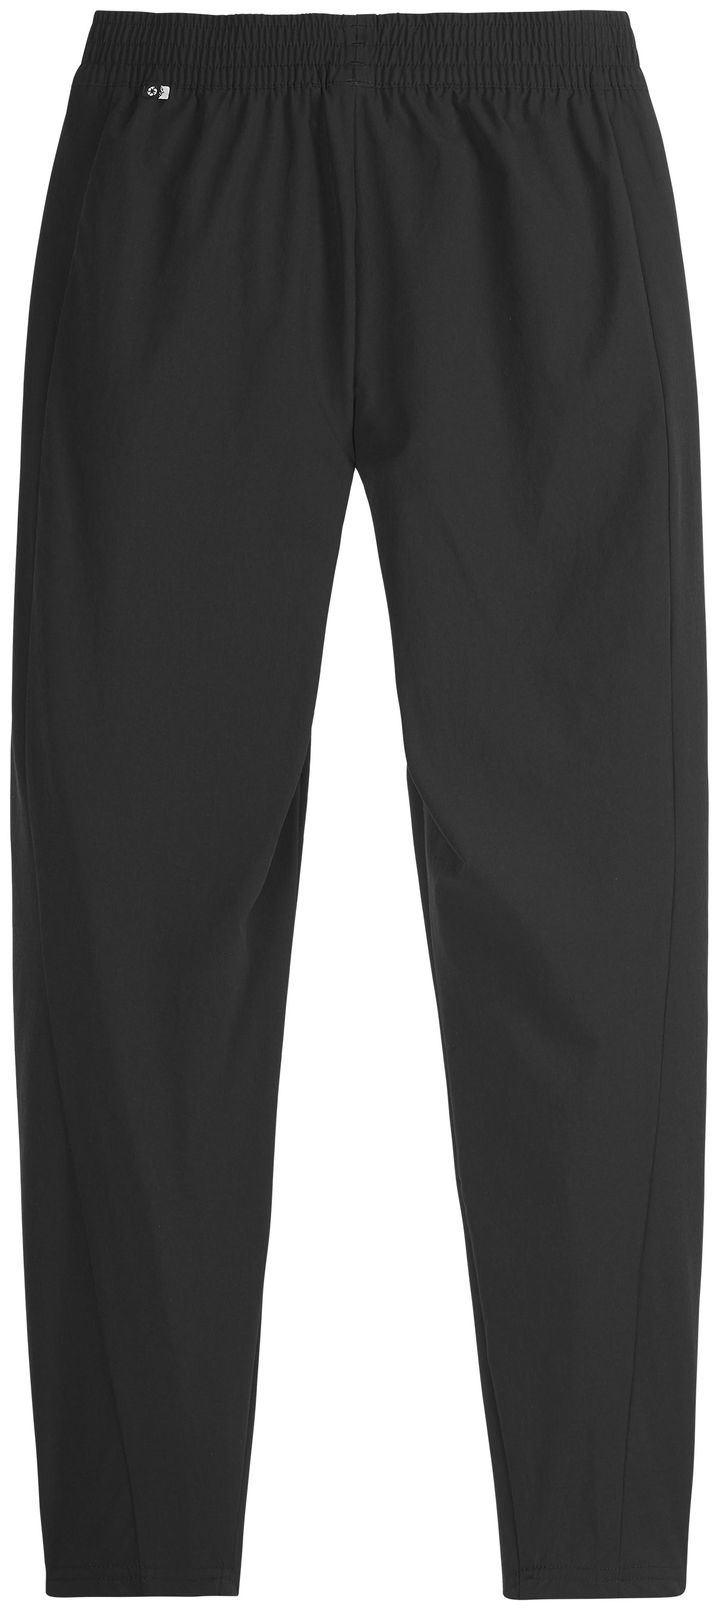 Picture Organic Clothing Women's Tulee Stretch Pants Black Picture Organic Clothing